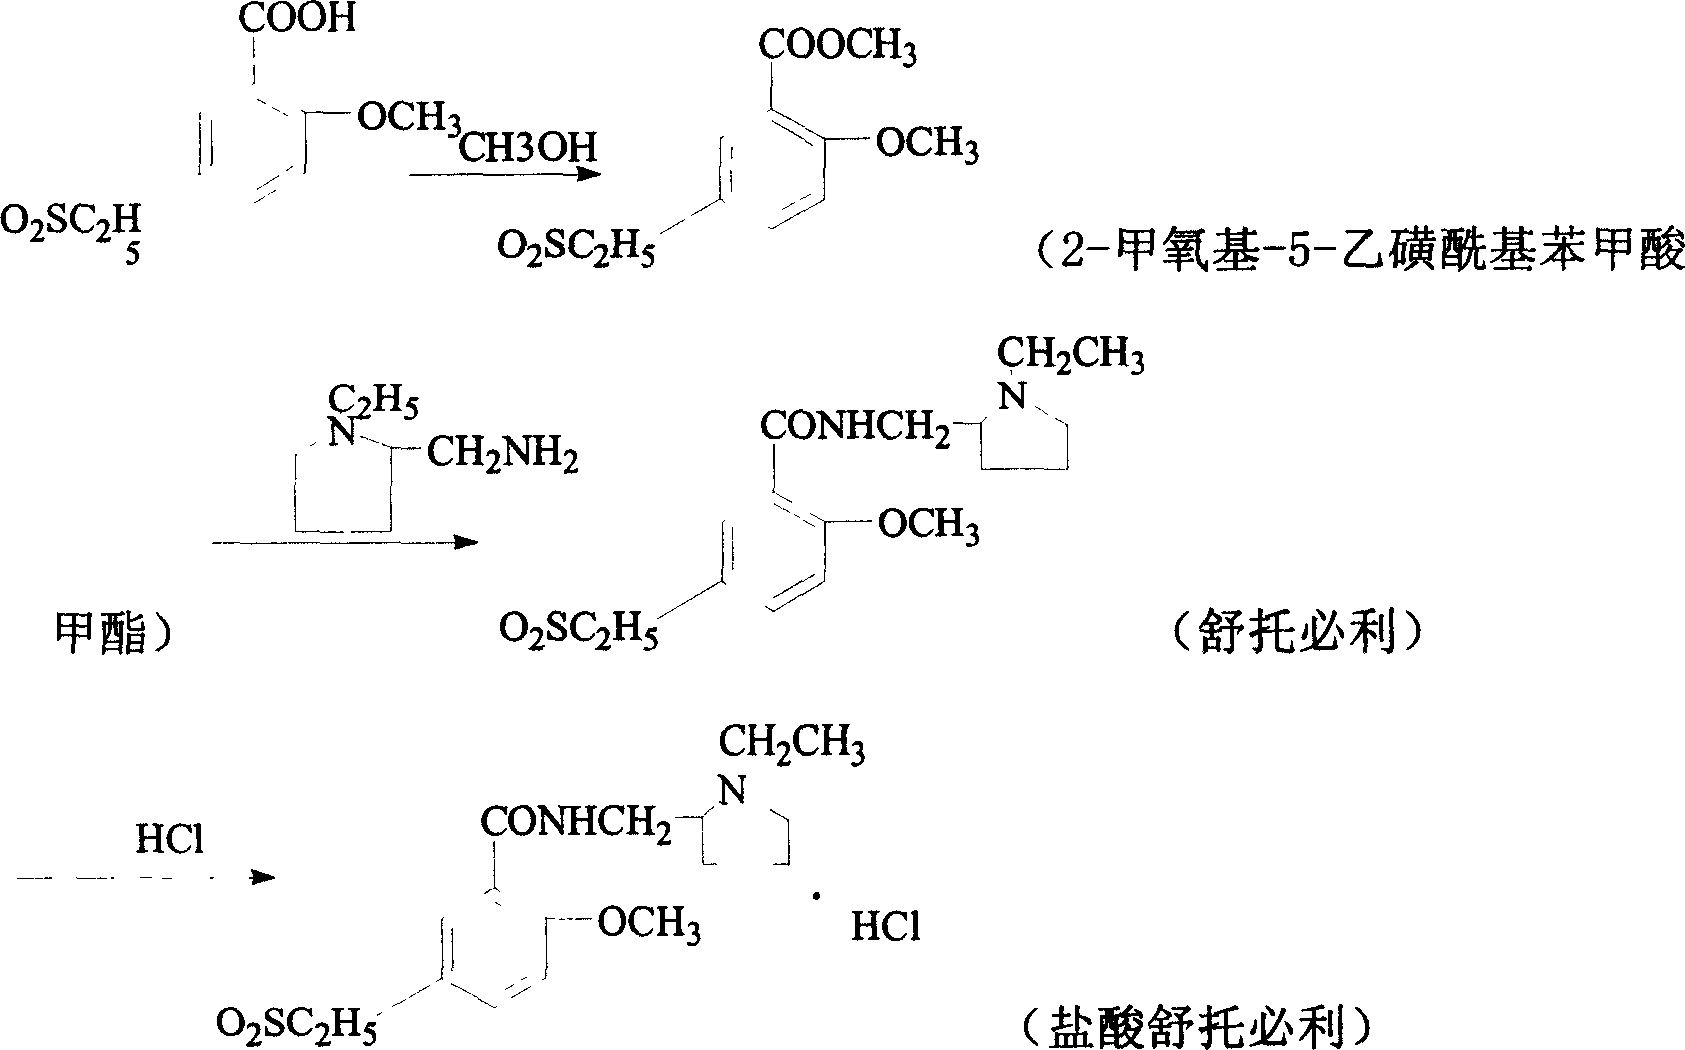 New synthesis process of sultopride hydrochloride